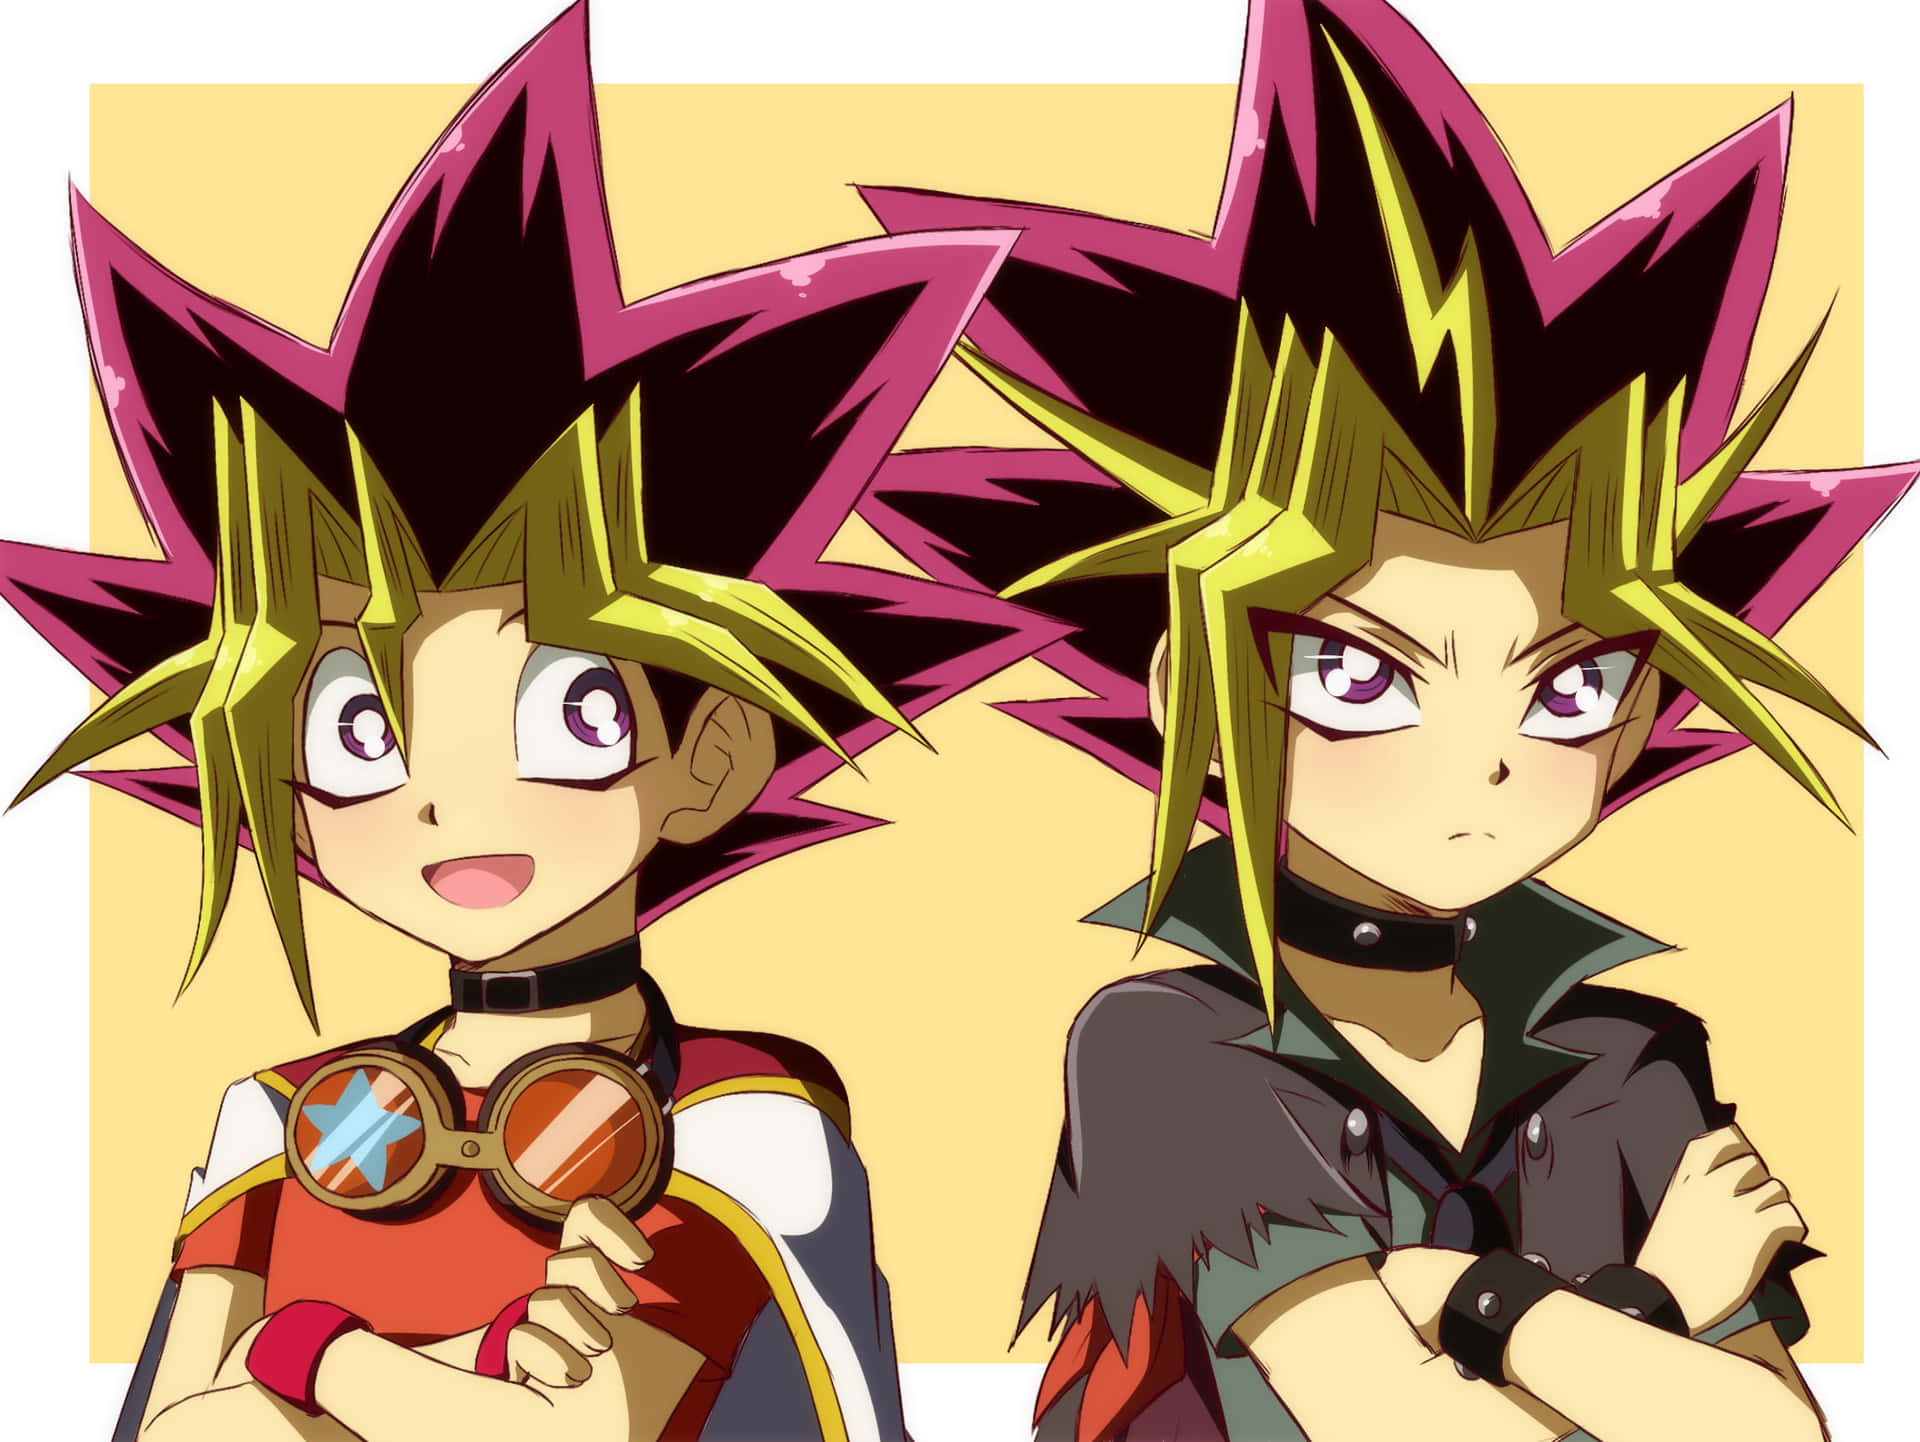 Legendary Yugi Muto with his Duel Monsters cards ready for a fierce battle Wallpaper